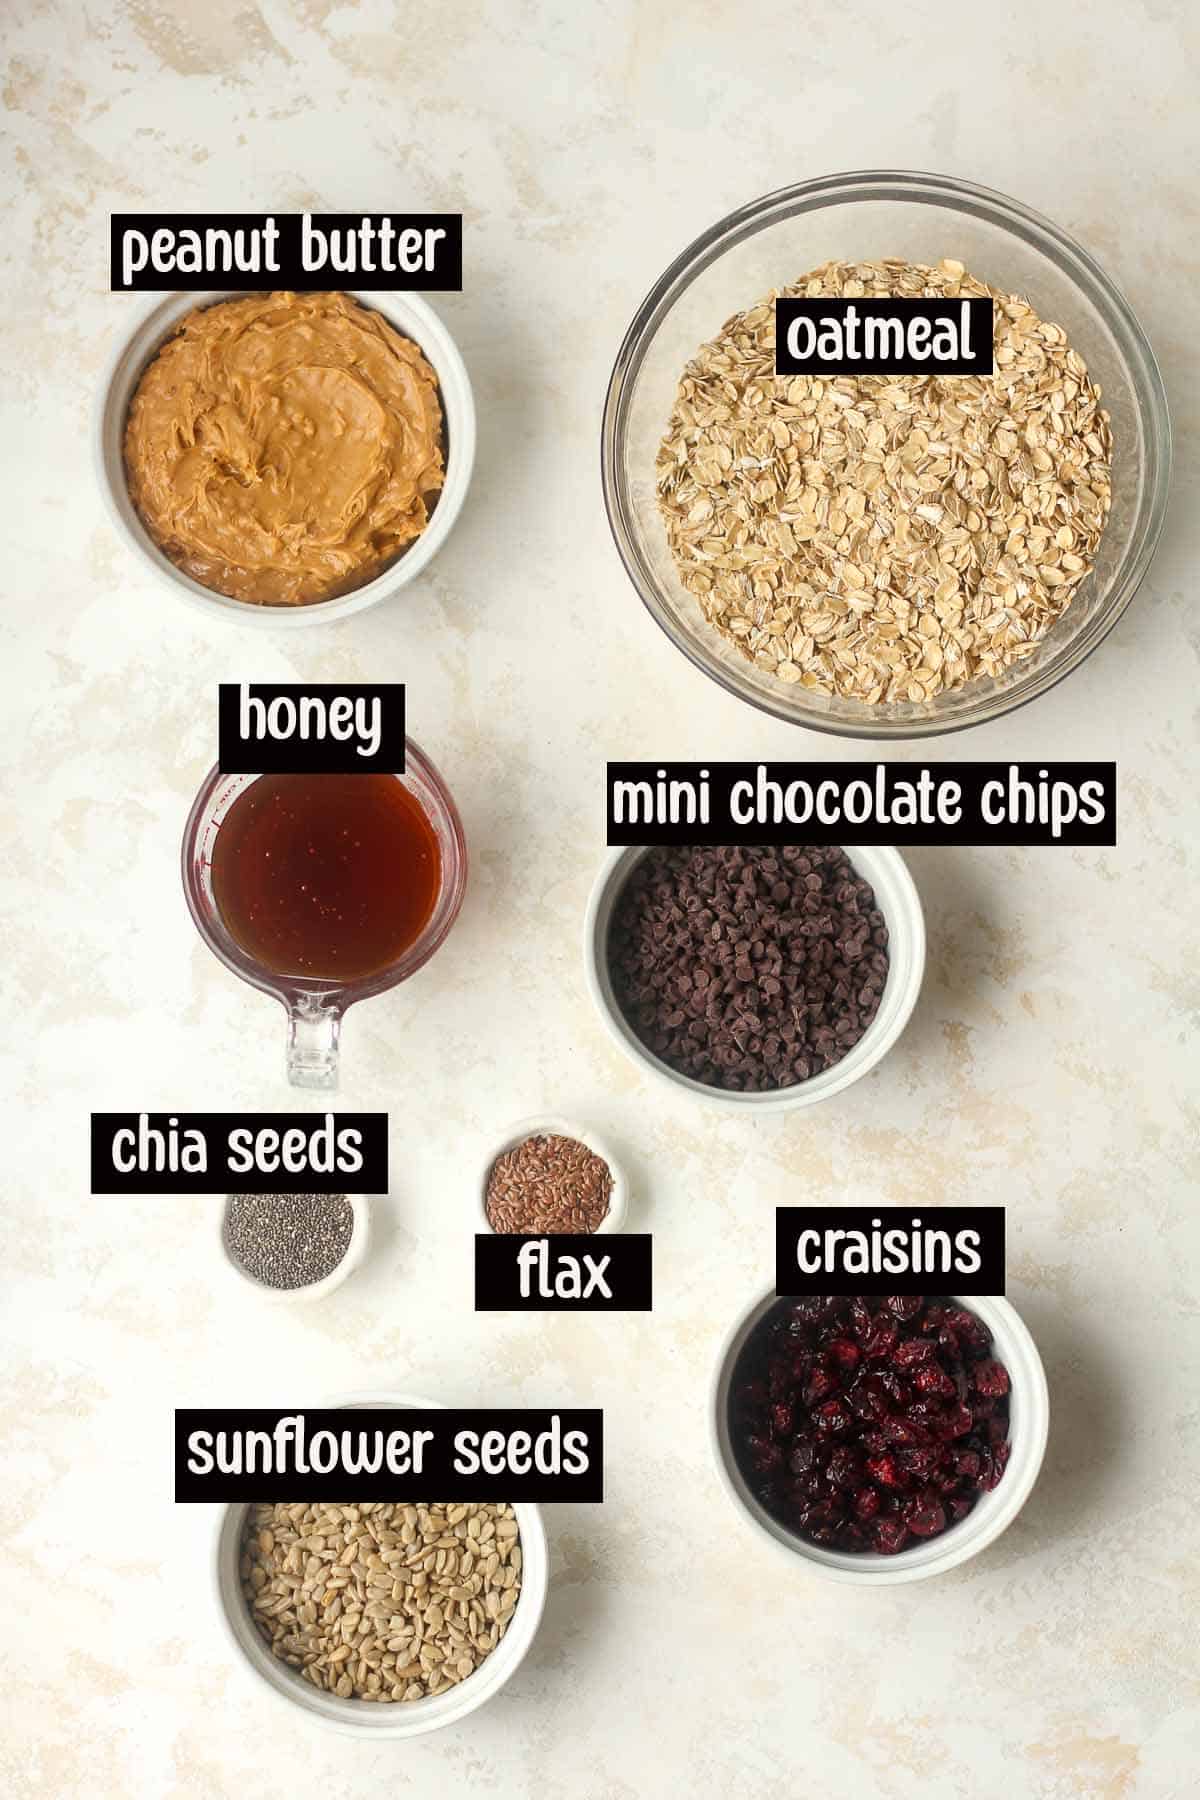 The ingredients for the power balls.